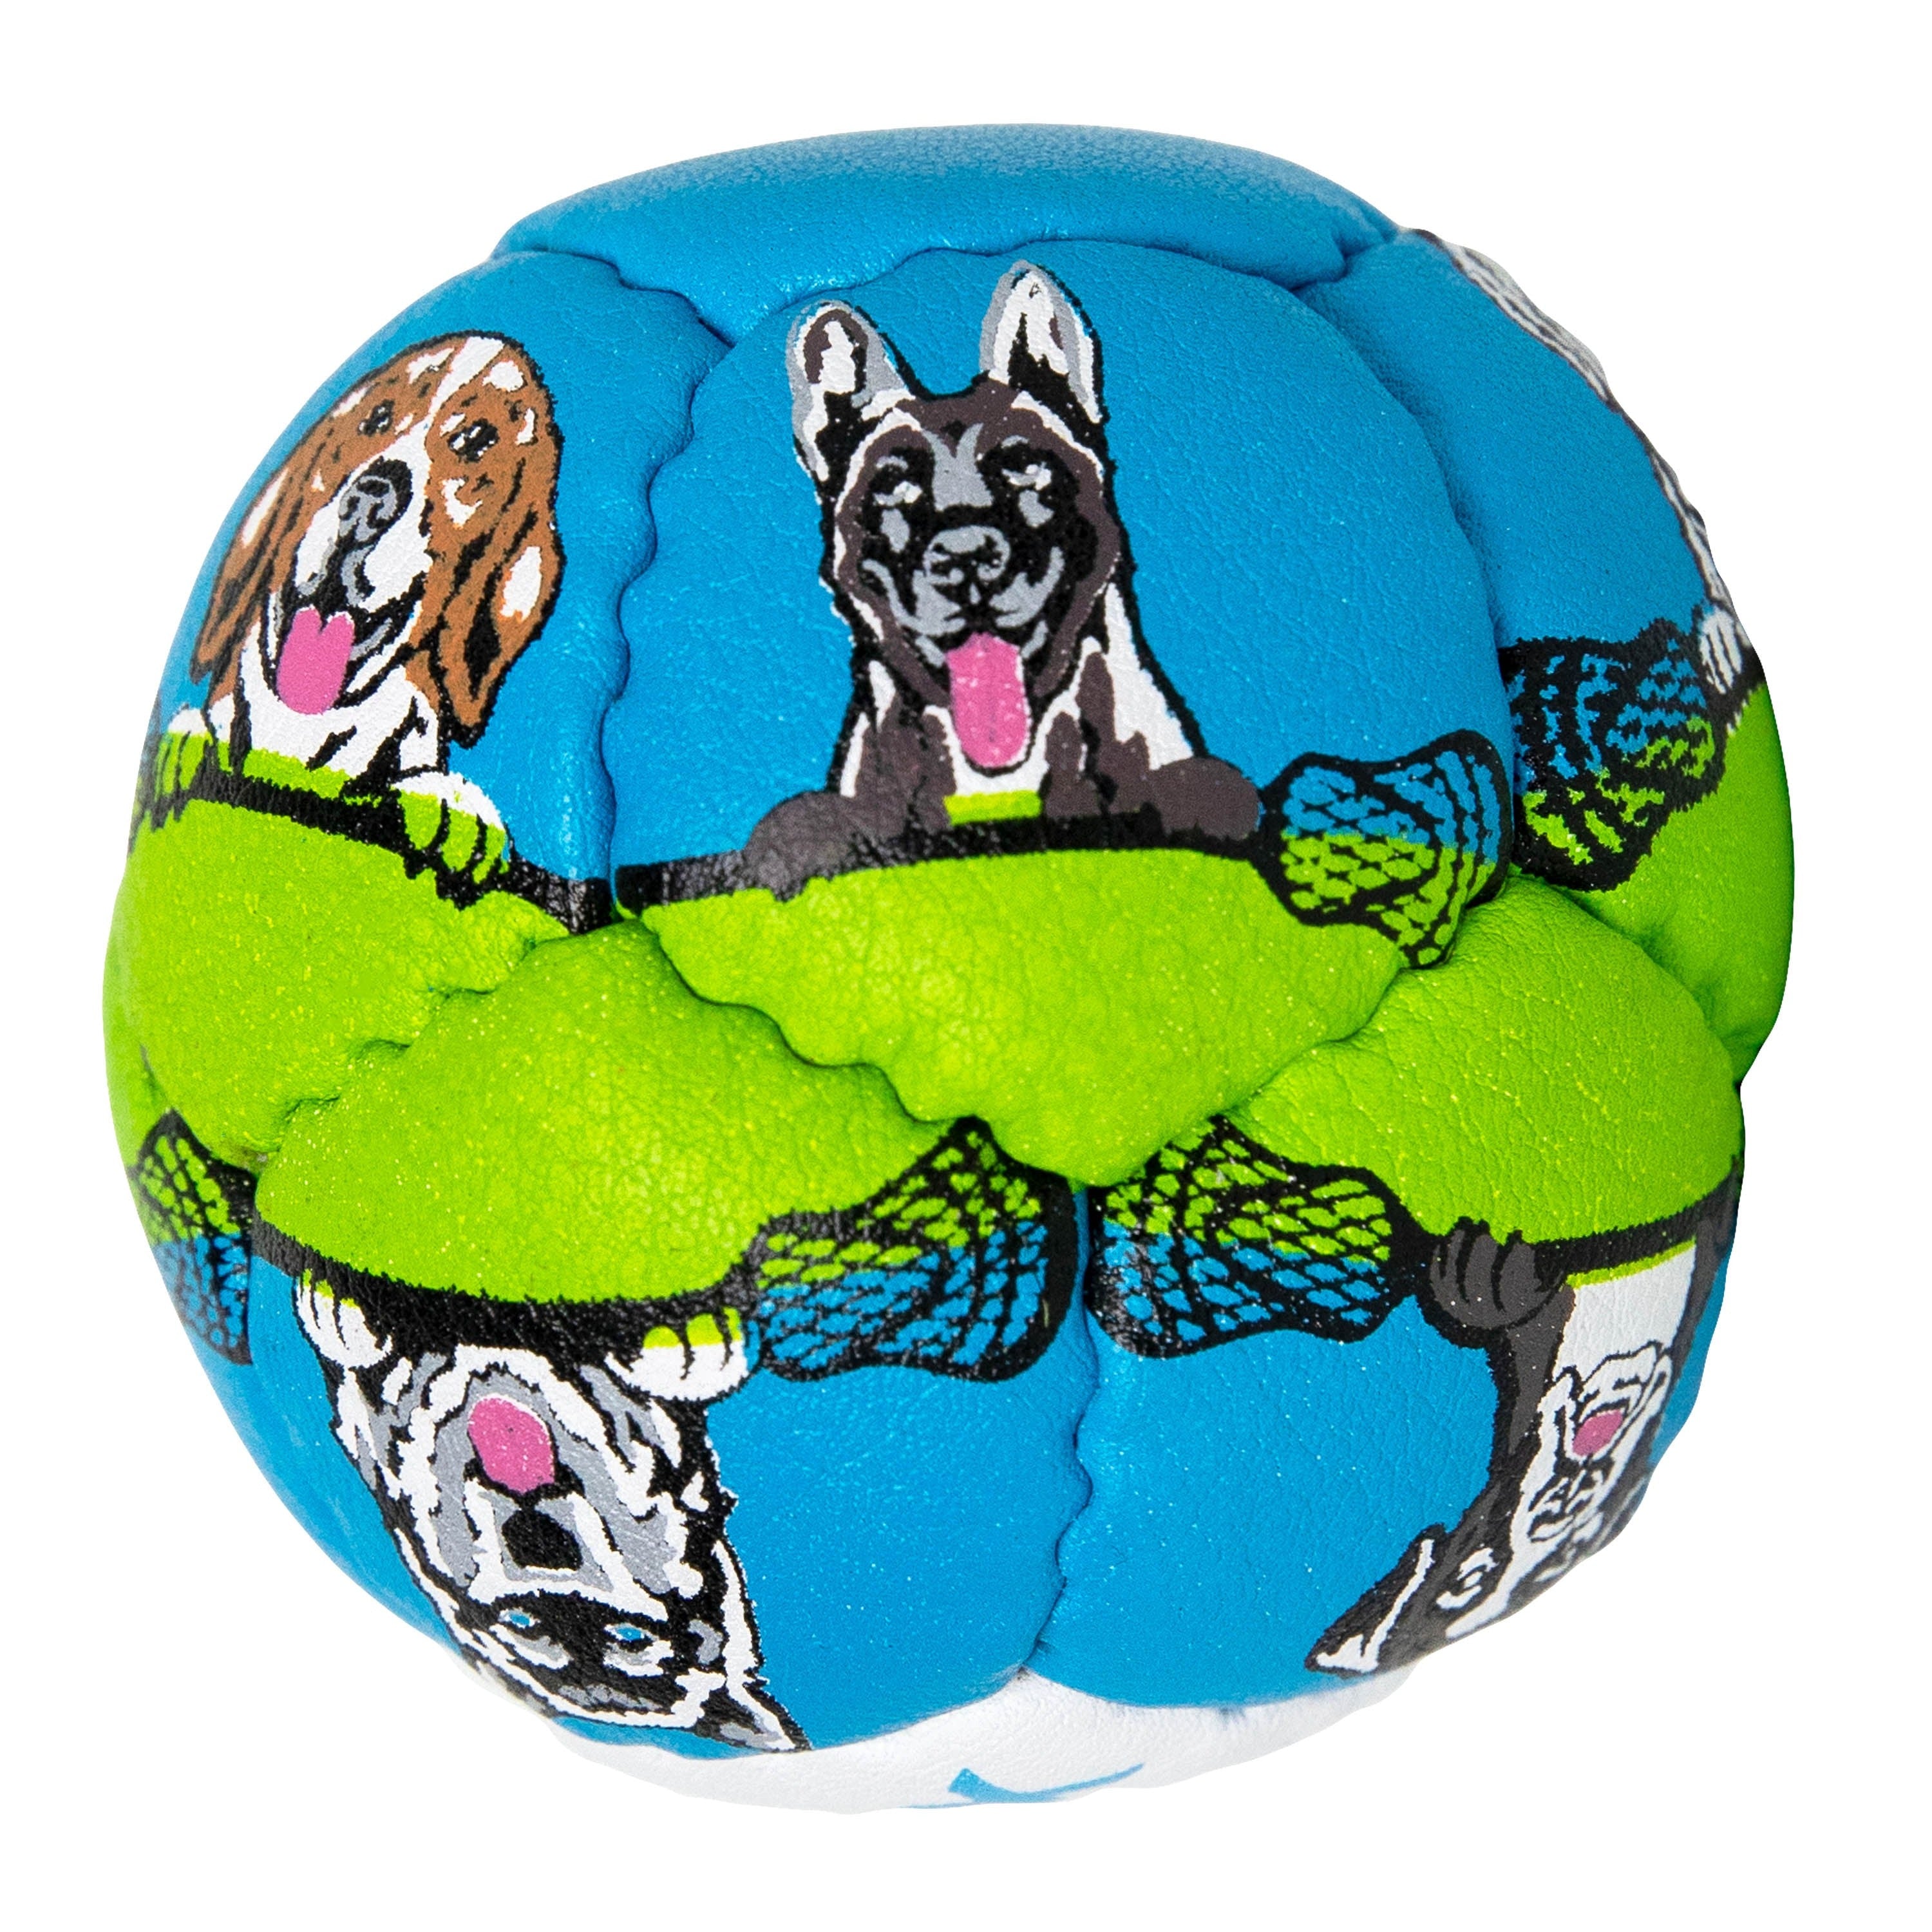 Face Off Dogs Swax Lax Lacrosse Practice Ball Pattern Indoor and Outdoor Training - Side View